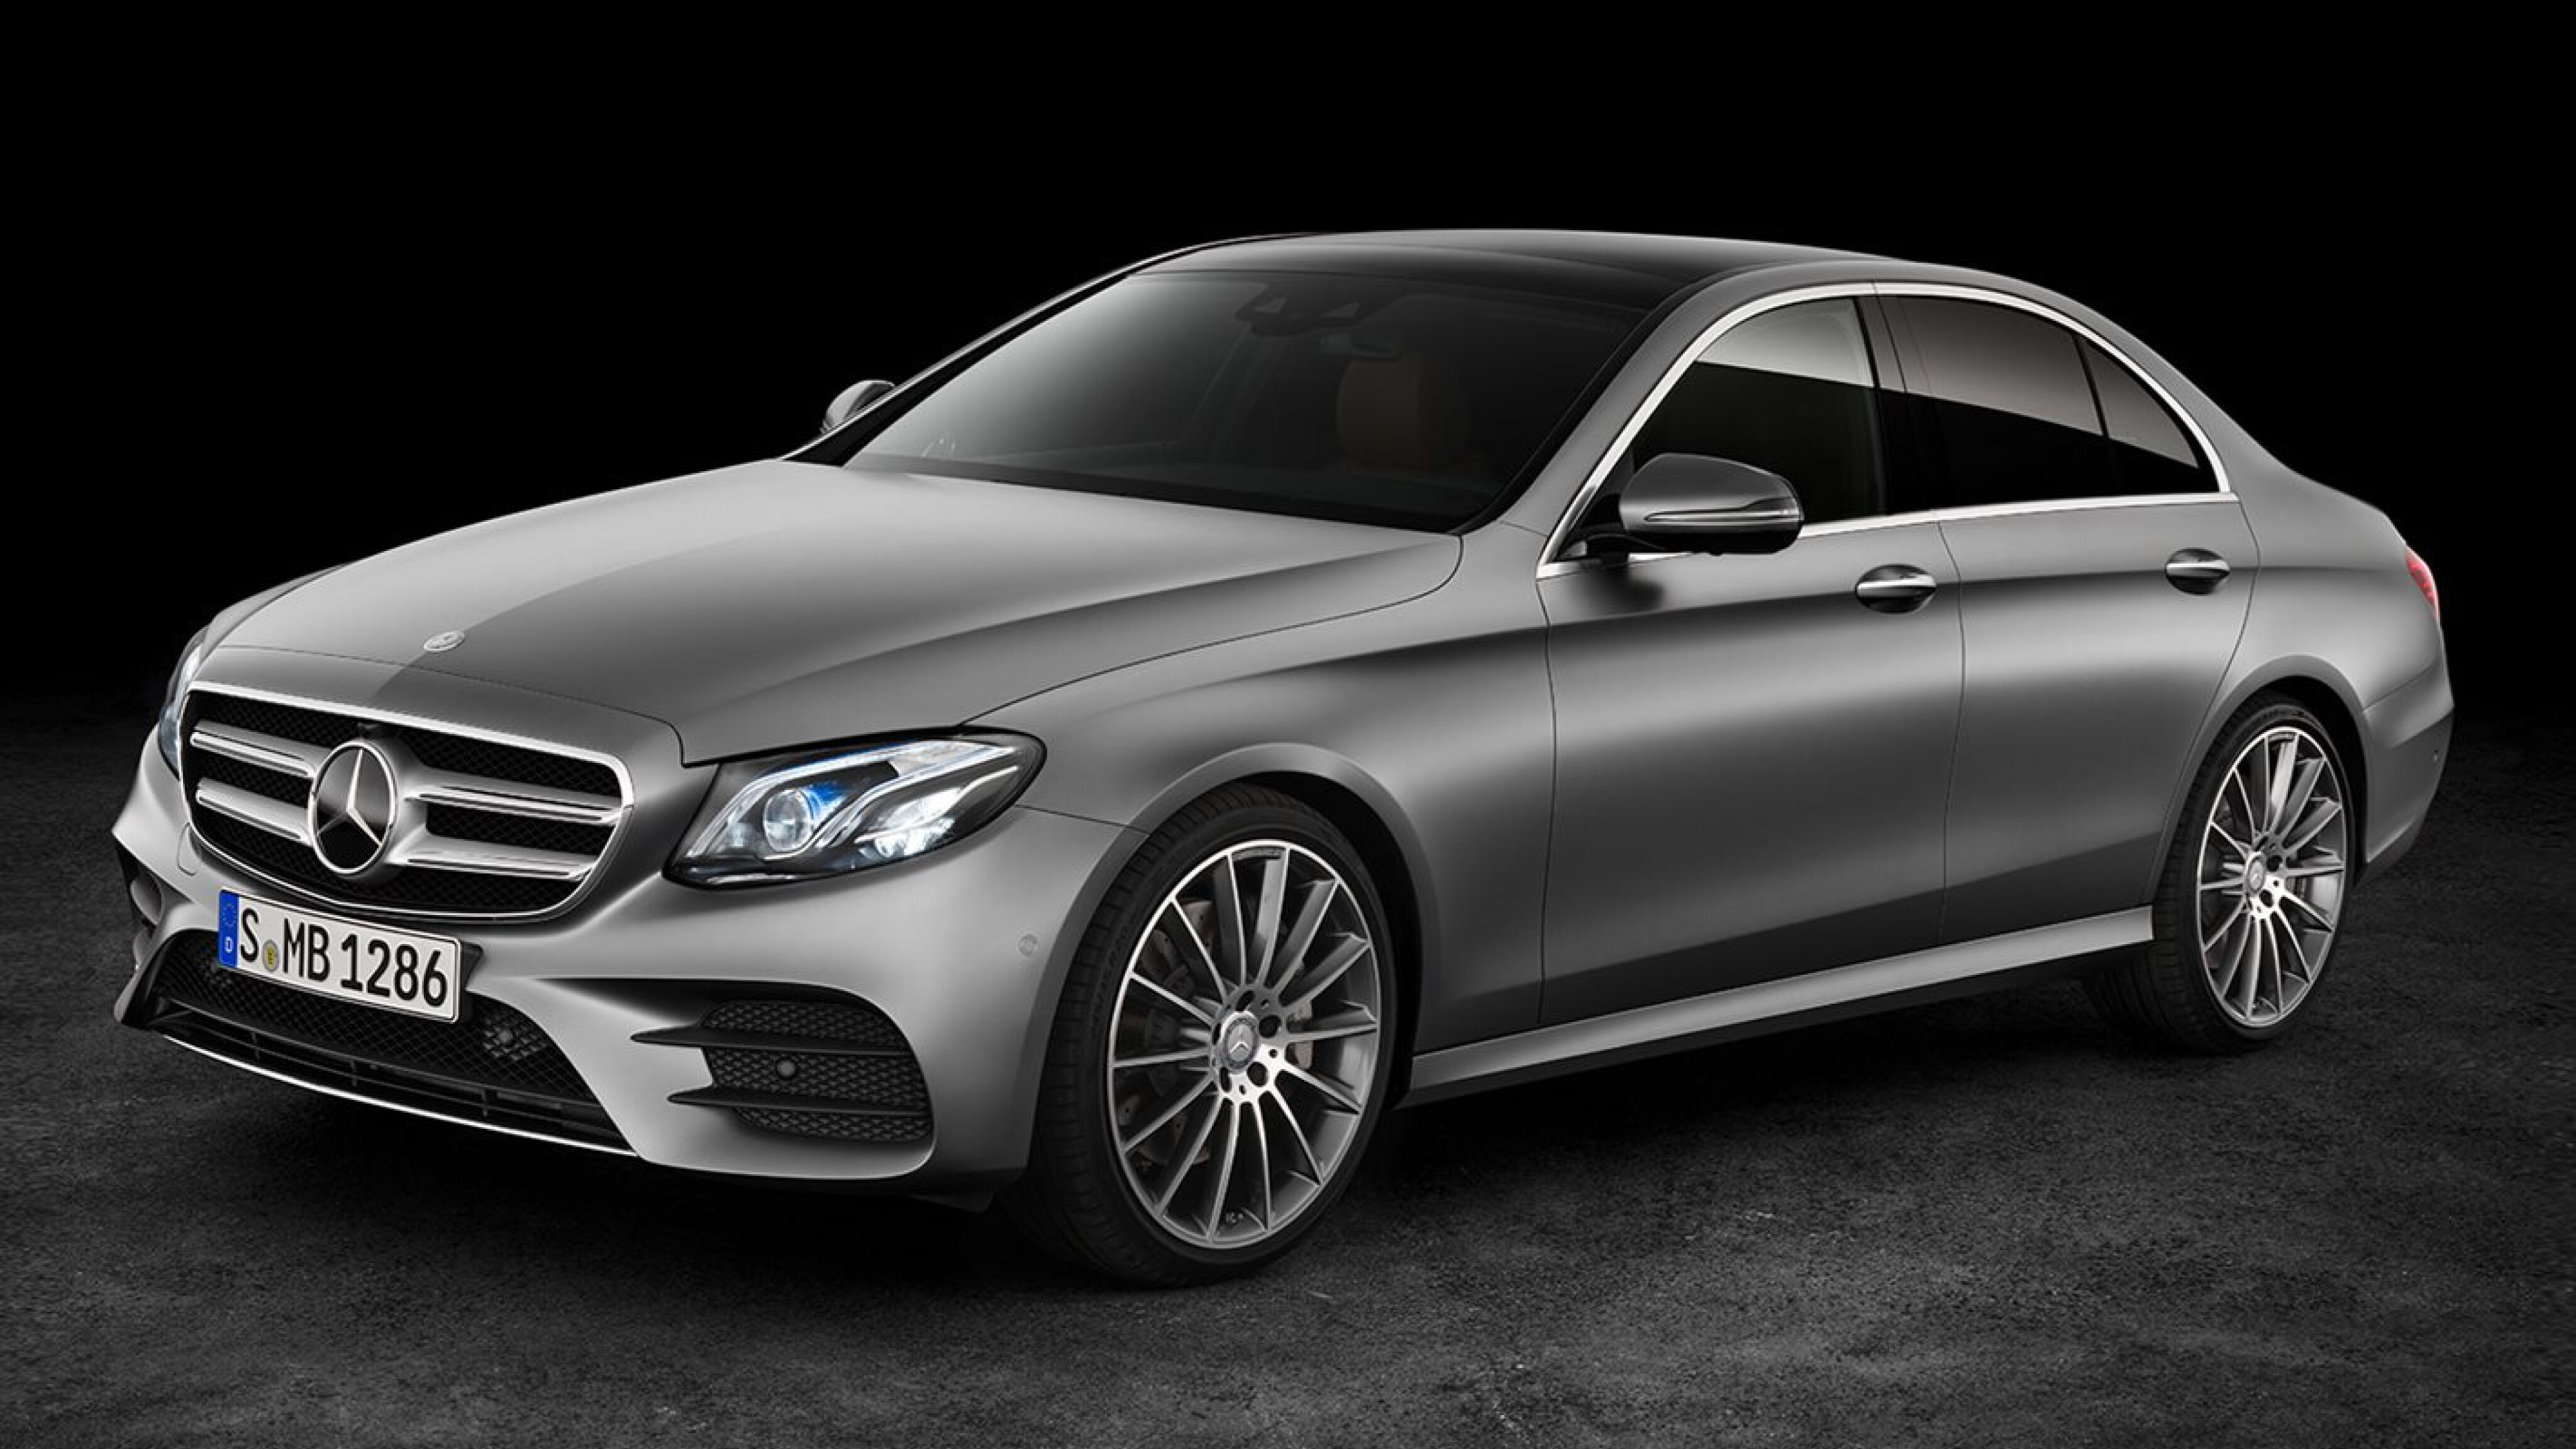 Mercedes-Benz E-Class: History and significance